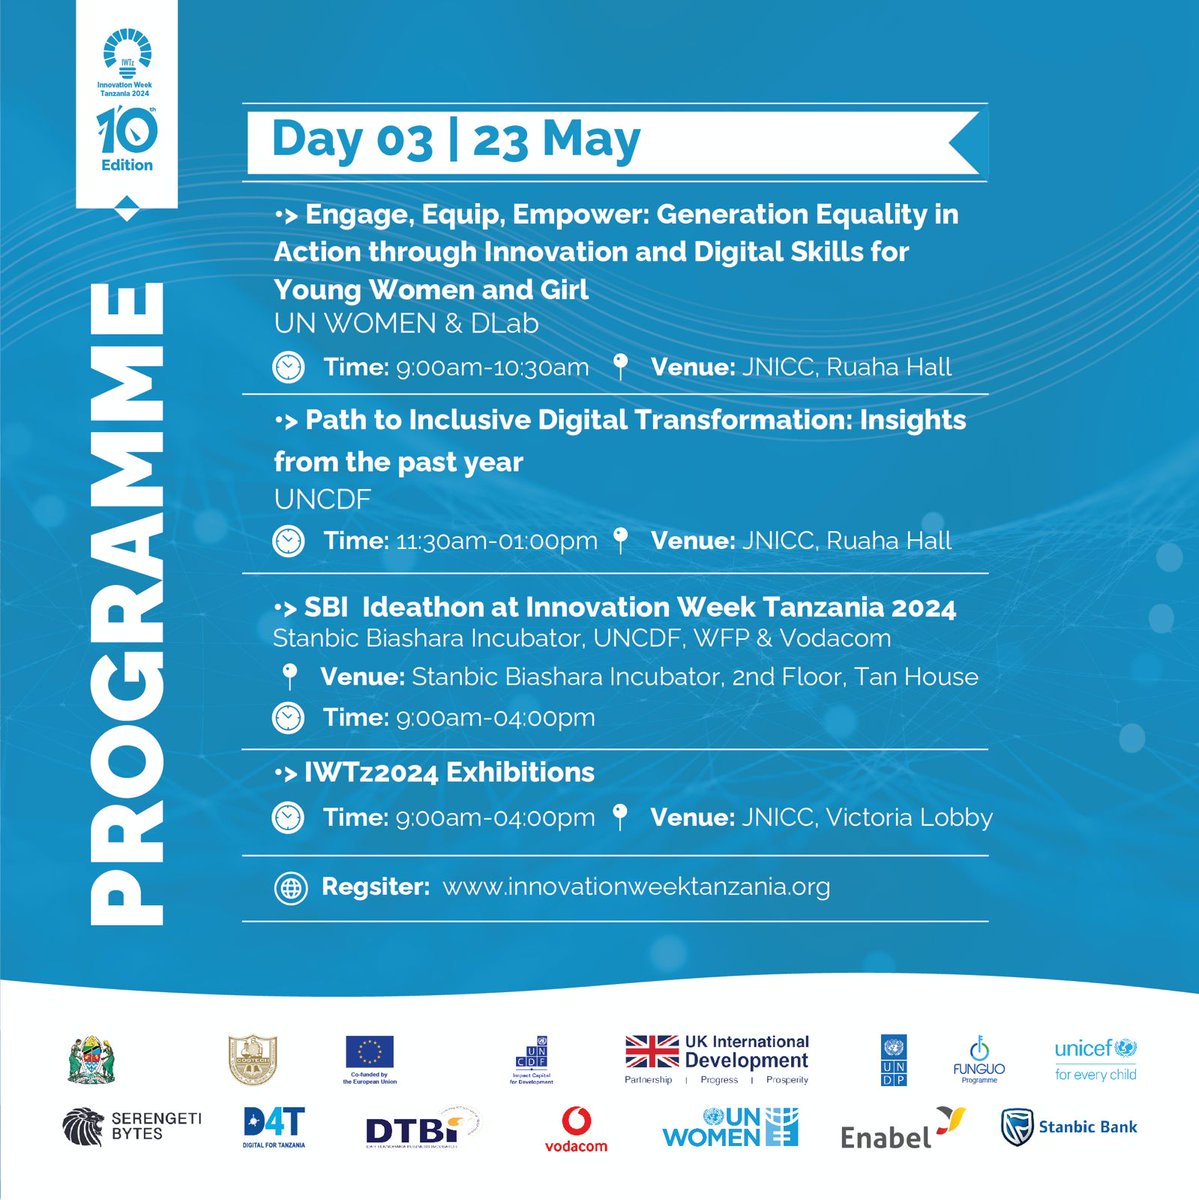 On Day 3 of #IWT24 'Engage, Equip, Empower: Innovation & Digital Skills for Young Women' with @unwomen & @dlab and 'Inclusive Digital Transformation: Insights from the Past Year' with @uncdf & SBI Ideathon by @stanbicbank, @uncdf, @worldfoodprogramme, & @vodacomtanzania.